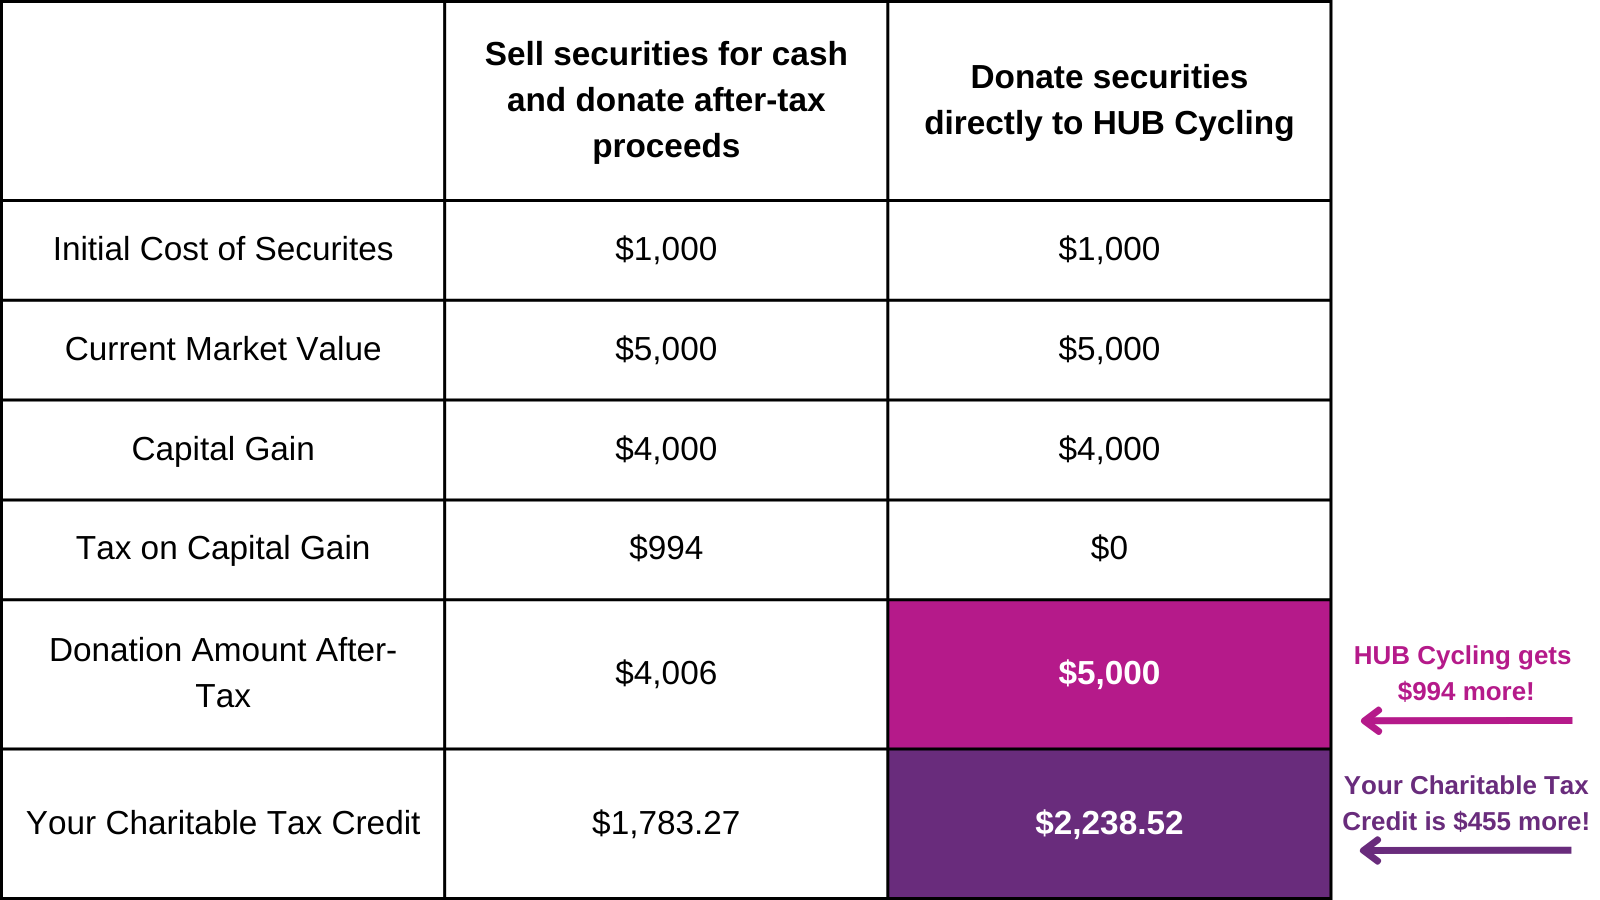 Chart showing that if you donate securities directly to HUB Cycling instead of selling securities for cash and donate after-tax proceeds, HUB Cycling gets $994 more and your tax credit is $455 more for a $1,000 cost of securities with a $5,000 market value.